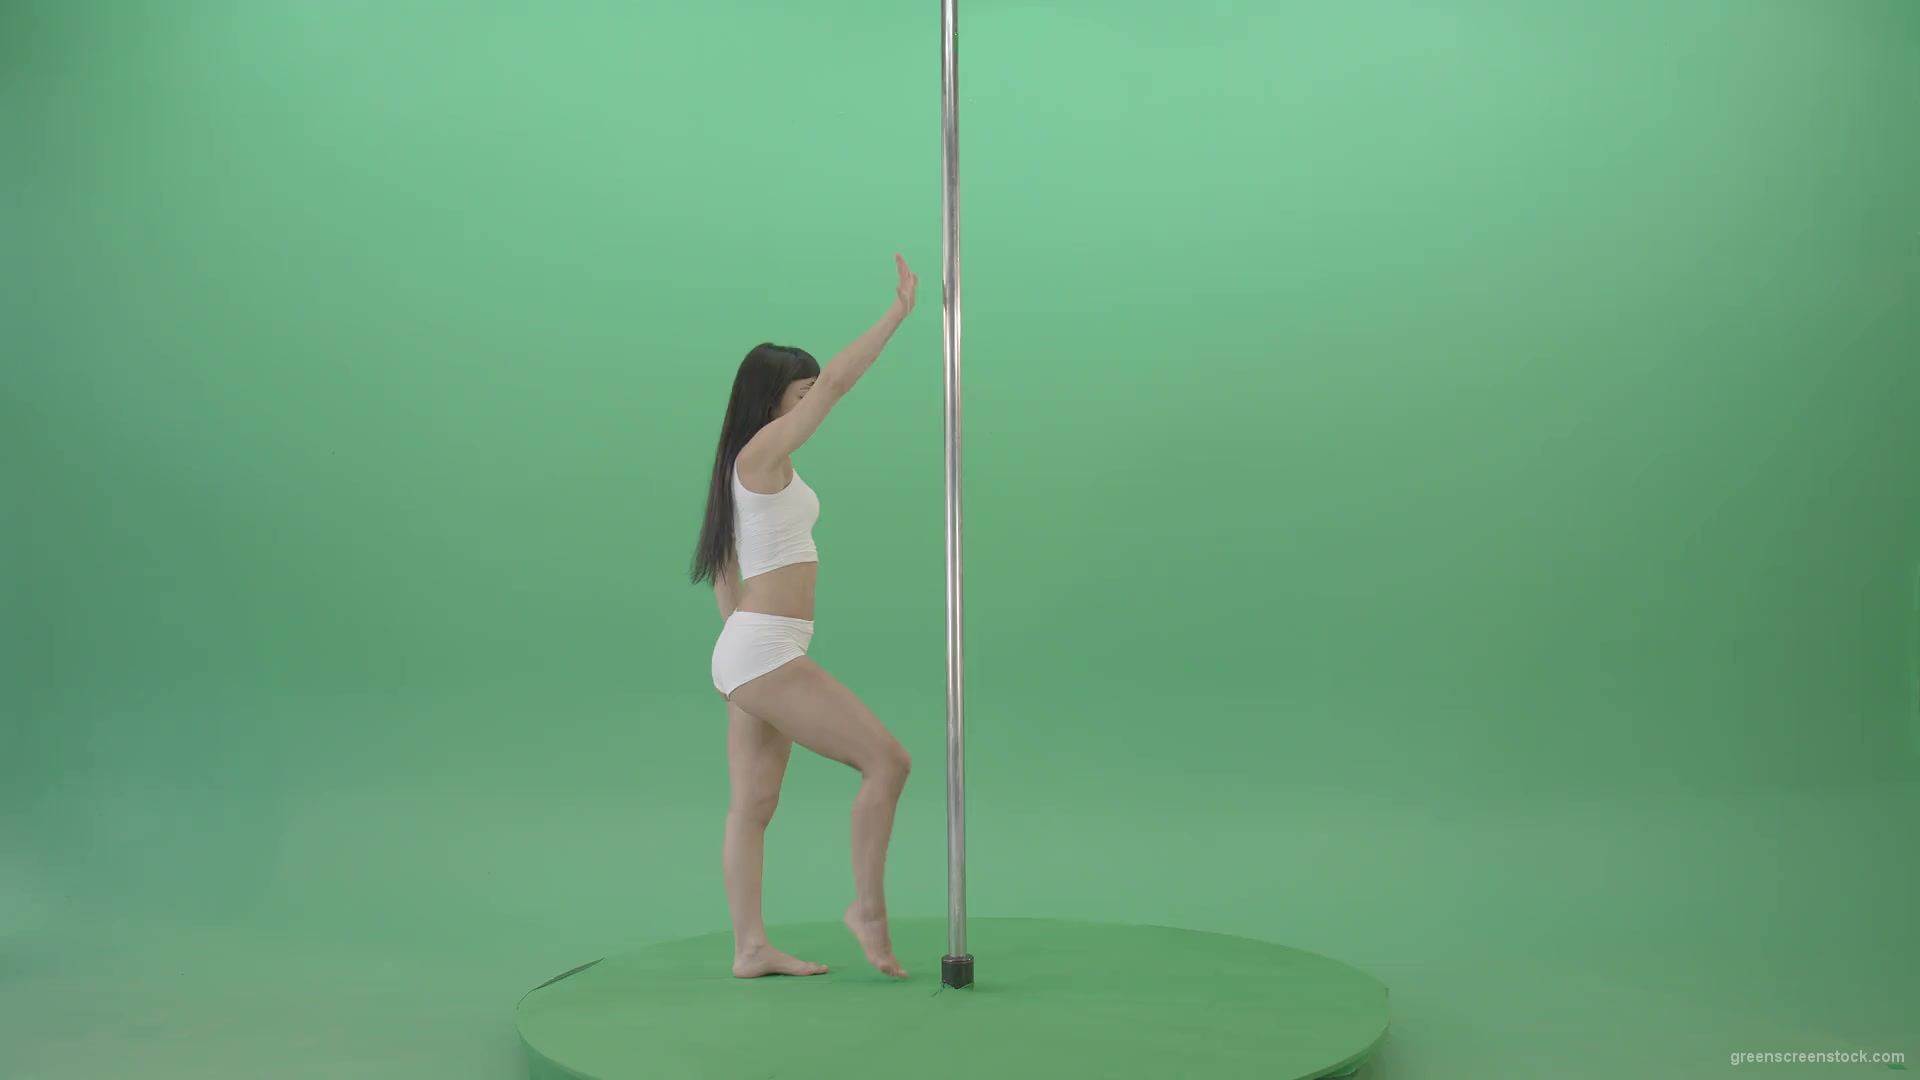 Dark-Hair-Girl-in-White-body-dress-underwear-spinning-on-the-pilon-showing-exotic-dance-over-green-screen-4K-Video-Footage-1920_001 Green Screen Stock